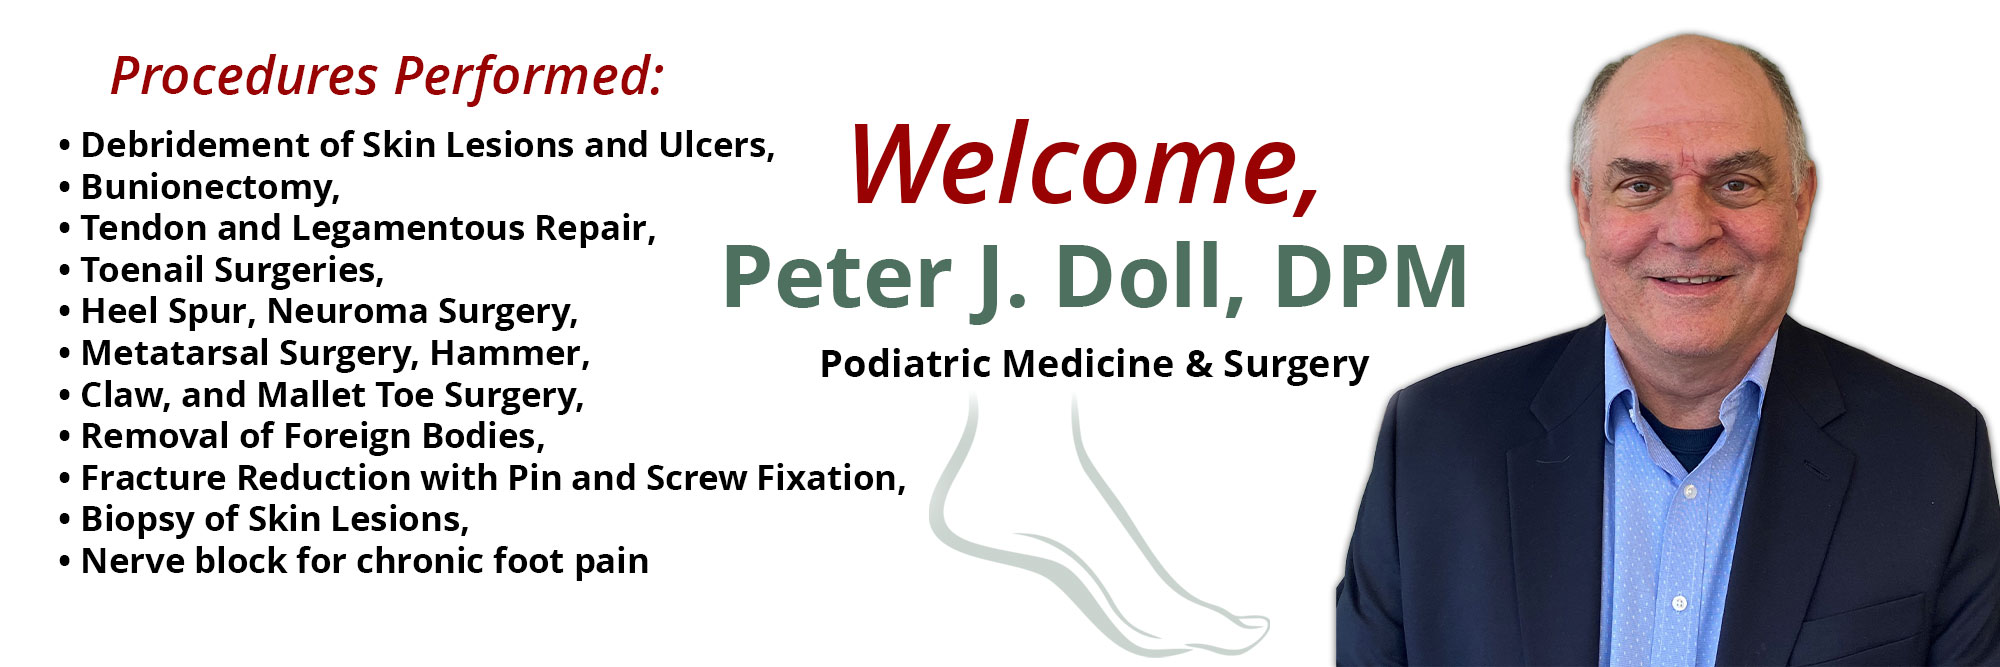 Welcome, Peter J. Doll, DPM
Pediatric Medicine & Surgery 


Procedures Performed:
* Debridement of Skin Lesions and Ulcers,
* Bunionectomy
*Tendon and Legamentious Repair,
*Toenail Surgeries,
*Heel Spur, Neuroma Surgery,
*Metatarsal Surgery, Hammer,
*Claw, and Mallet Toe Surgery
* Removal of Foreign Bodies,
* Fracture Reduction with Pin and Screw Fixation,
* Biopsy of Skin Lesions,
*Nerve block for chronic foot pain